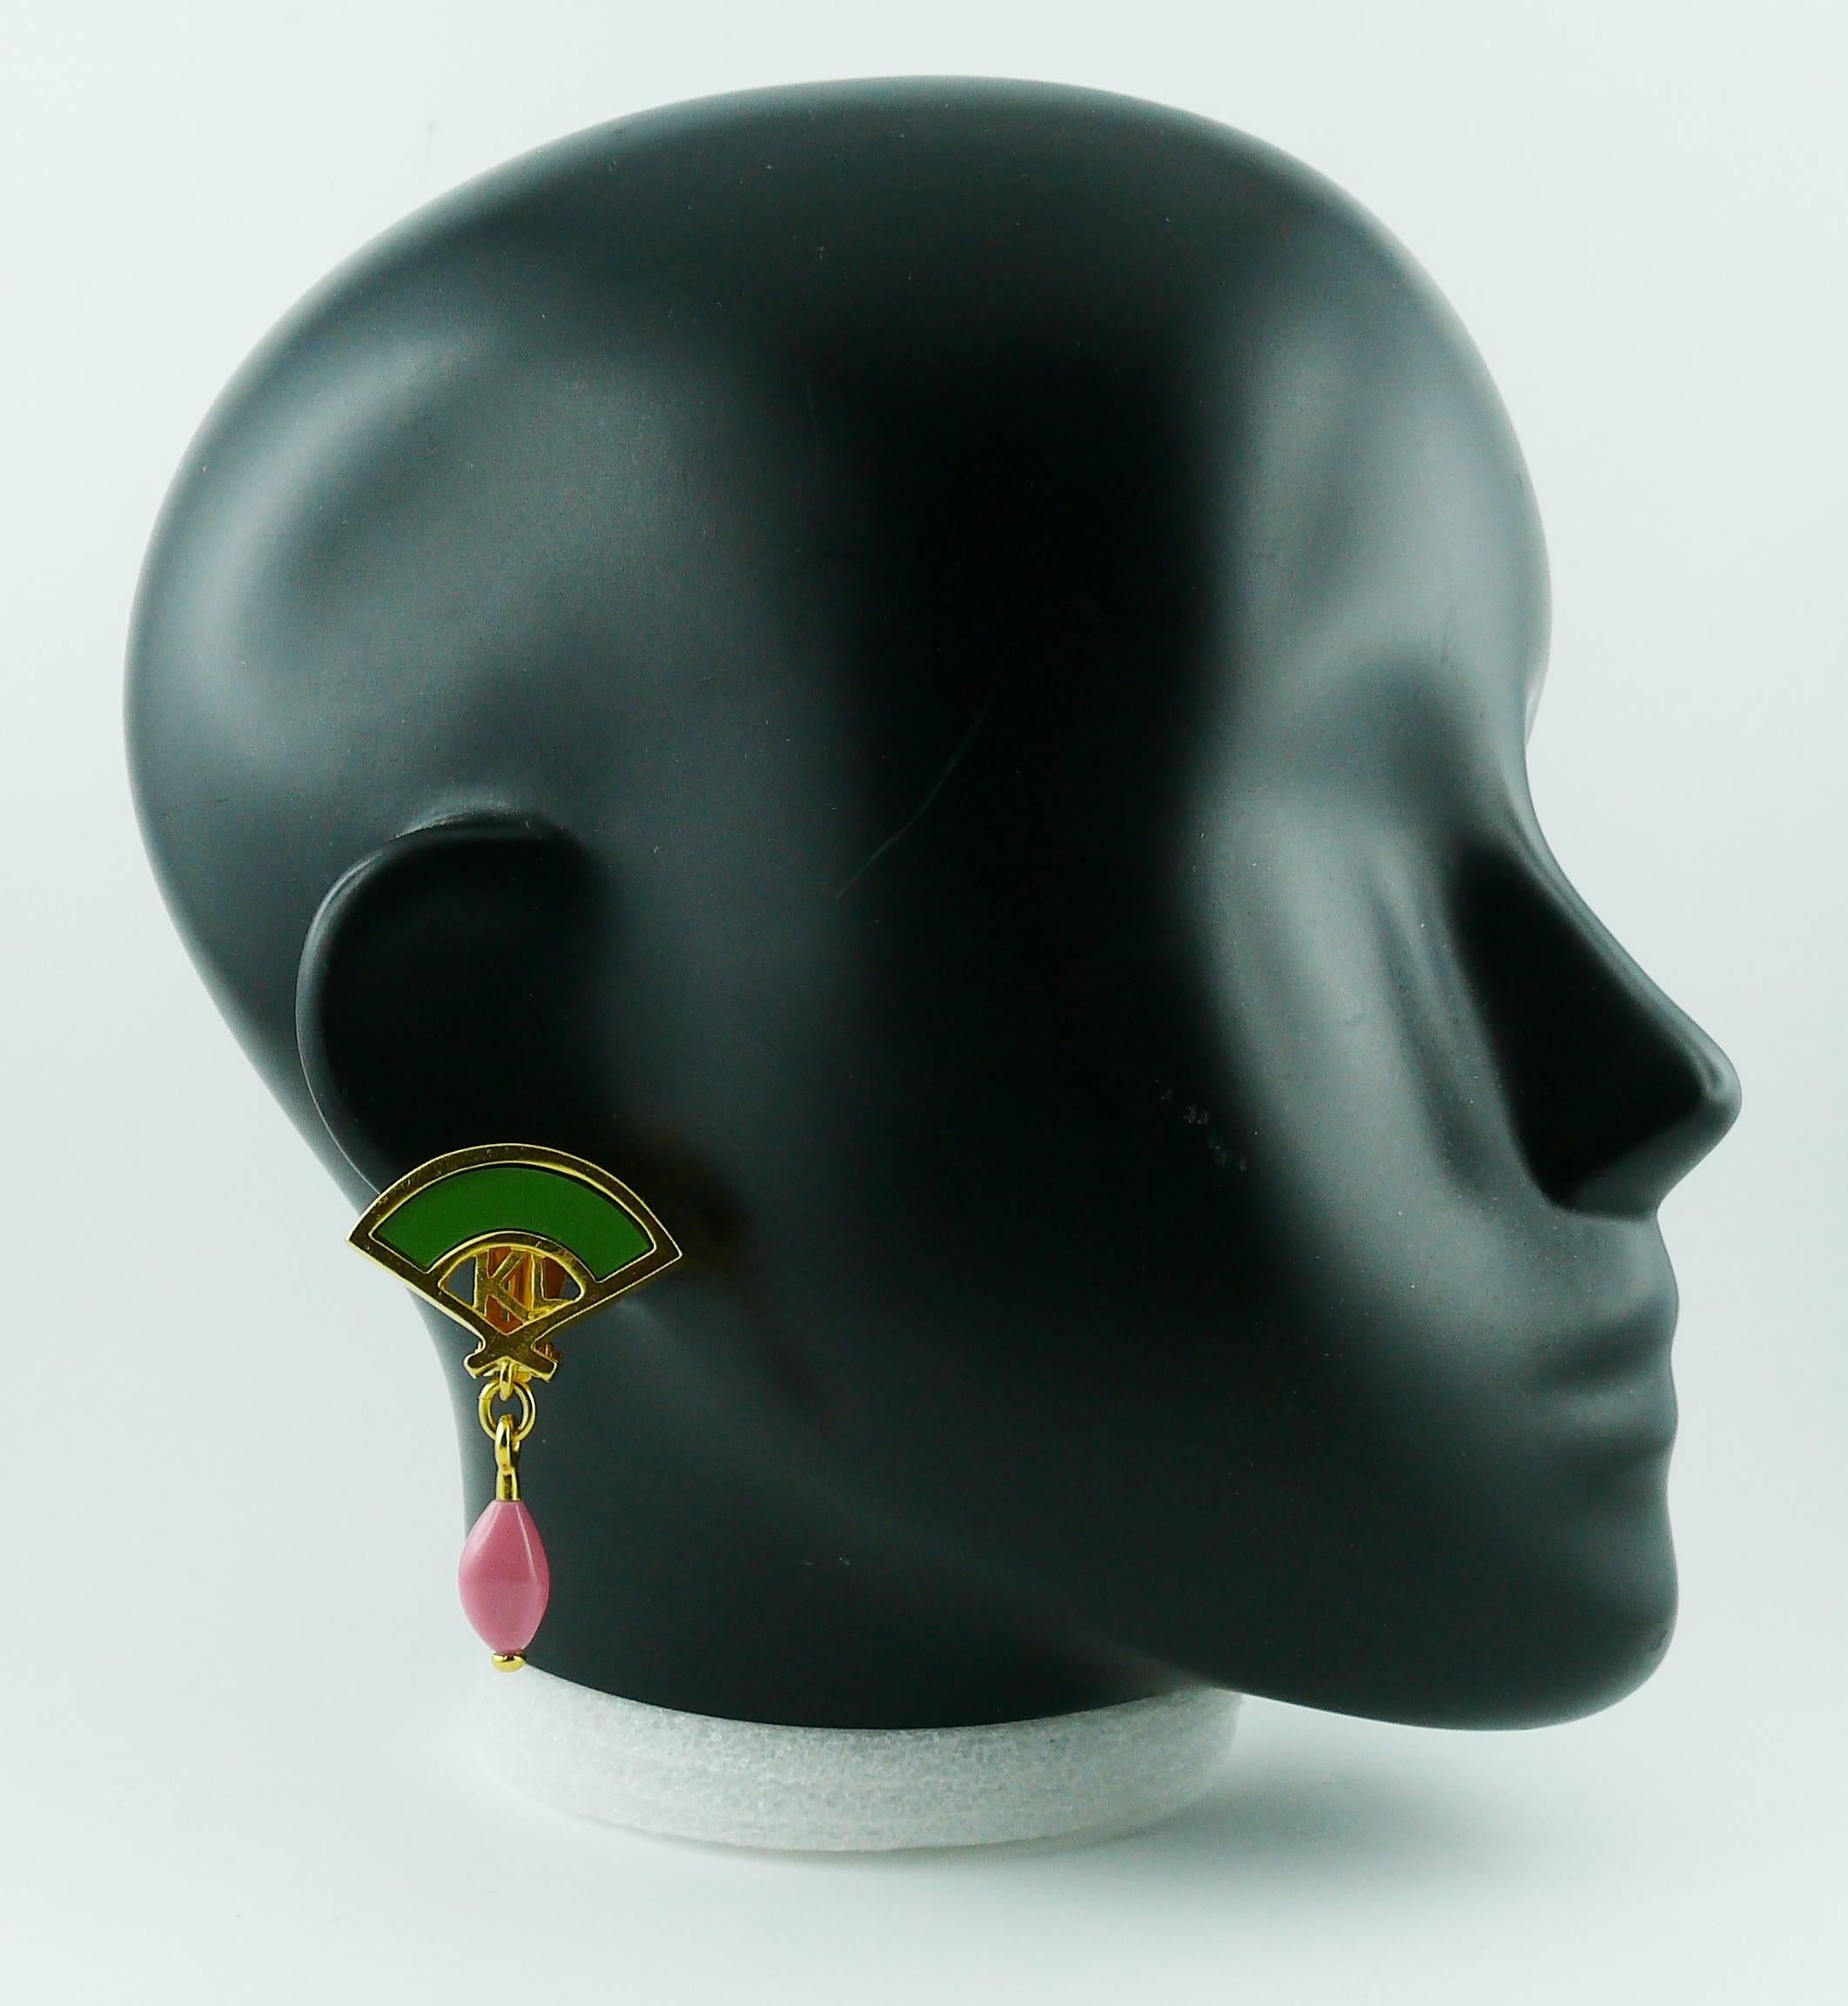 KARL LAGERFELD vintage iconic gold toned dangling earrings (clip-on) featuring a fan design embellished with green resin and a pink resin drop.

Embossed KL.

Indicative measurements : length approx. 5.4 cm (2.13 inches) / max. width approx. 3.5 cm